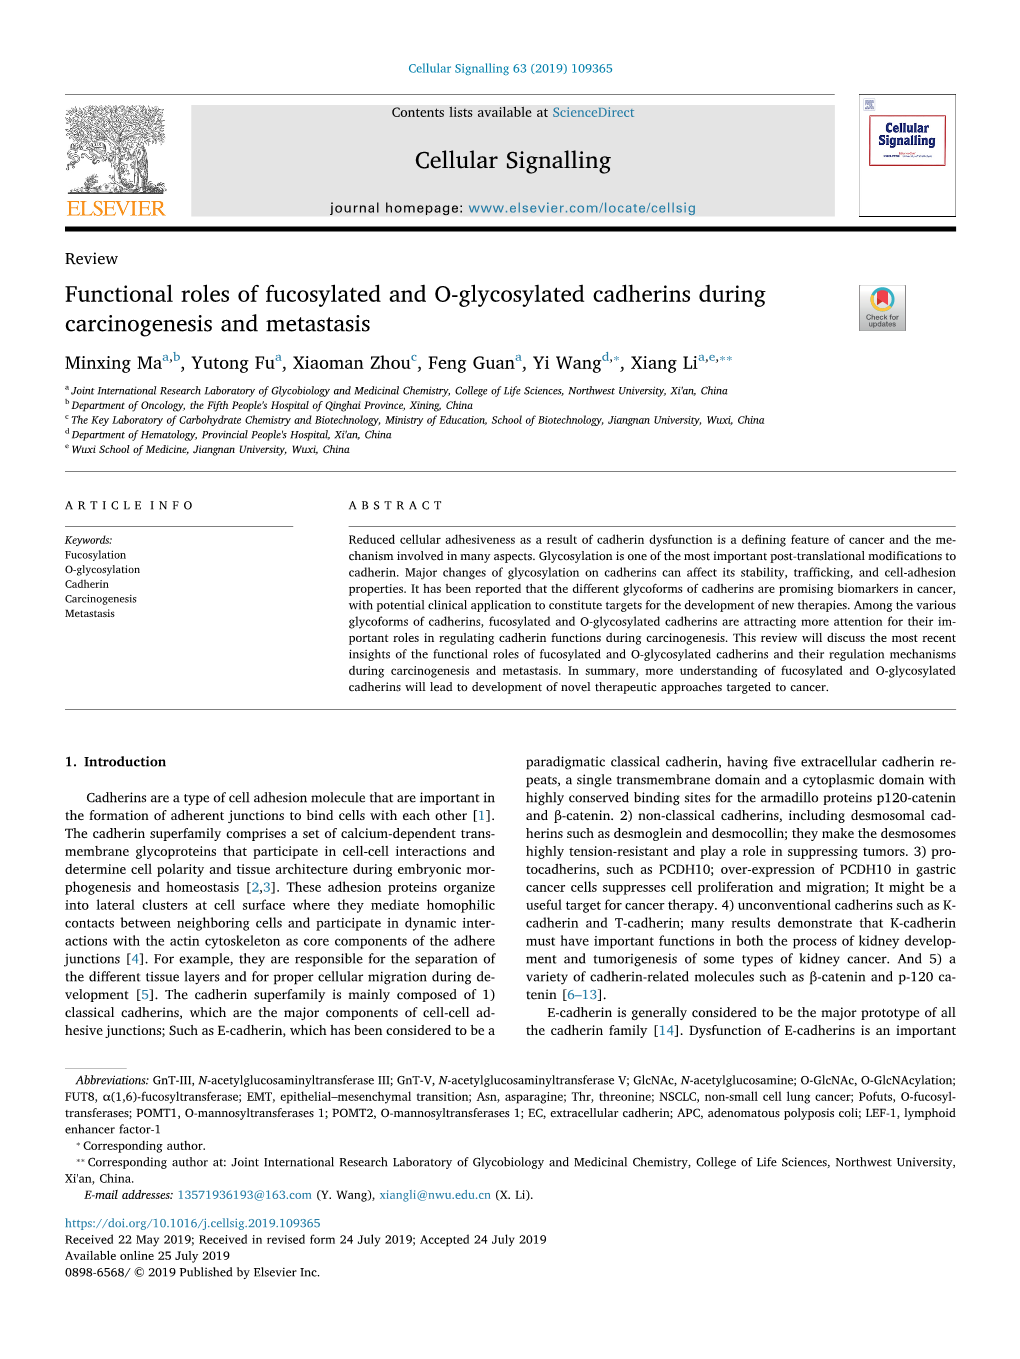 Functional Roles of Fucosylated and O-Glycosylated Cadherins During